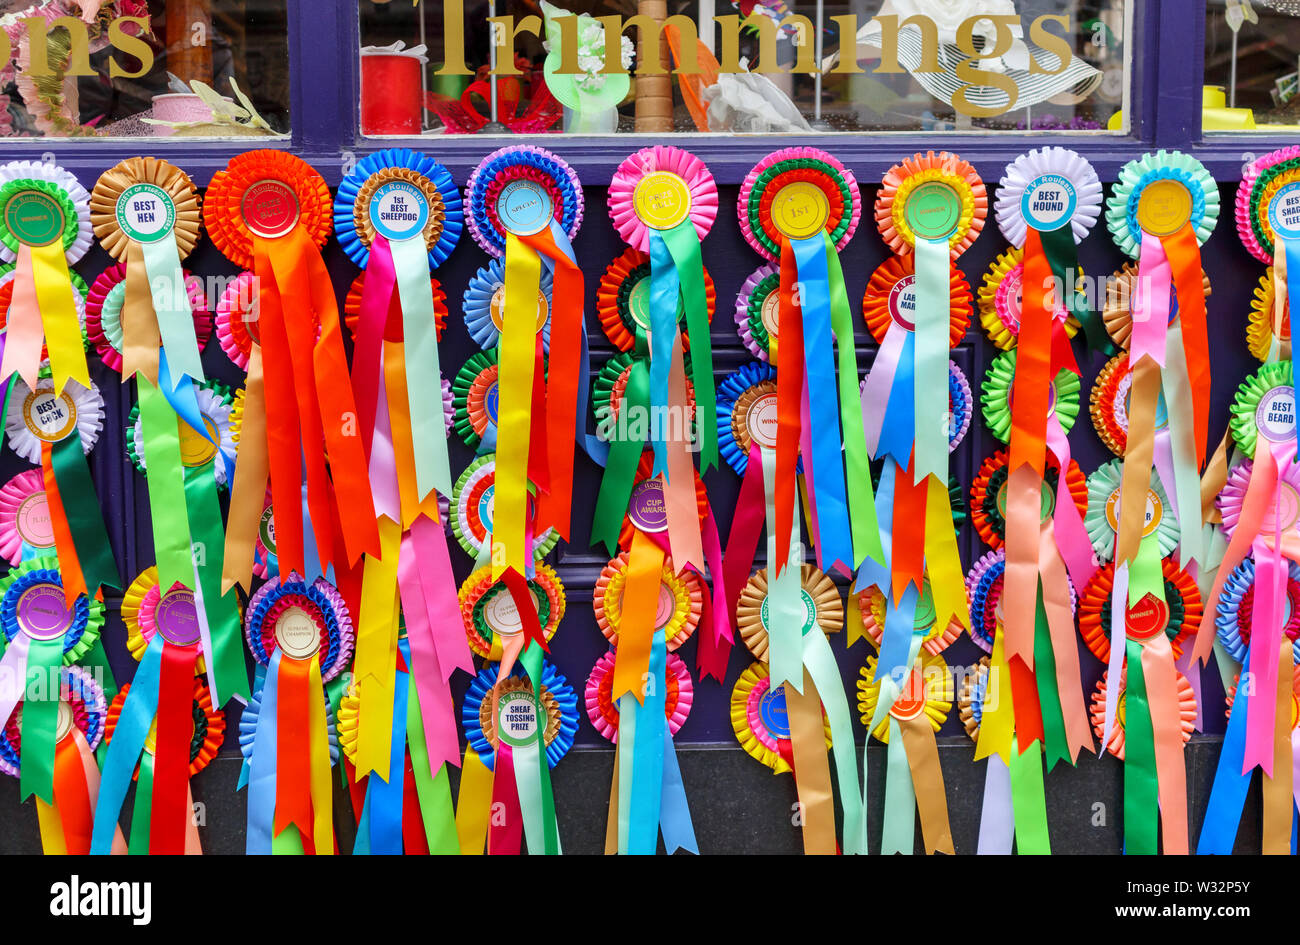 Brightly coloured prize and award rosettes and ribbons on display outside a shop in Bath, the largest city in Somerset, south-west England, UK Stock Photo